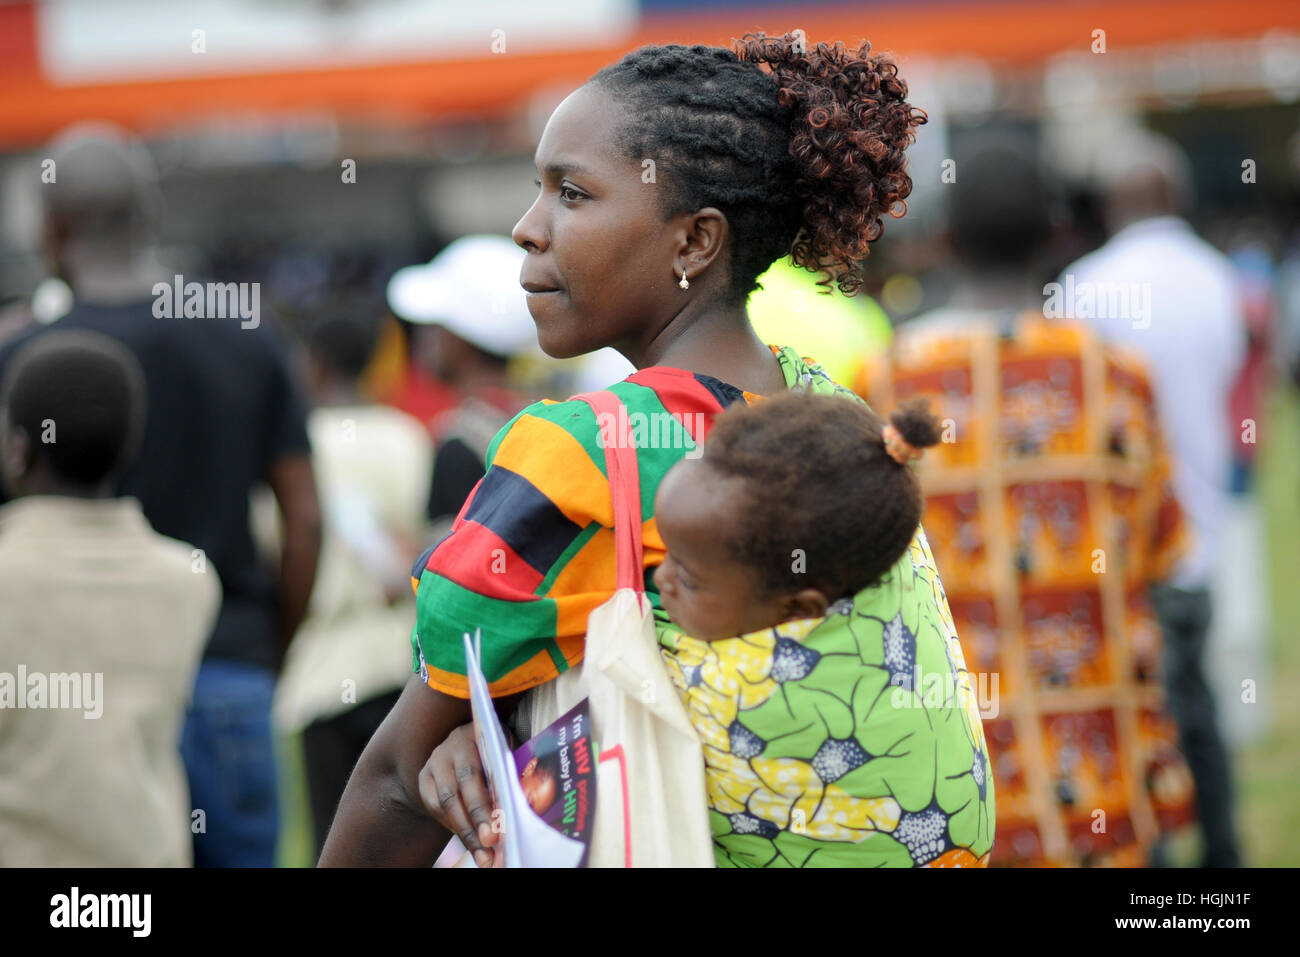 Lusaka, Zambia. 08th Mar, 2016. A women with an infant on her back at celebration of International Women's Day in Lusaka, Zambia, 08 March 2016. Photo: Britta Pedersen/dpa-Zentralbild/ZB/dpa/Alamy Live News Stock Photo